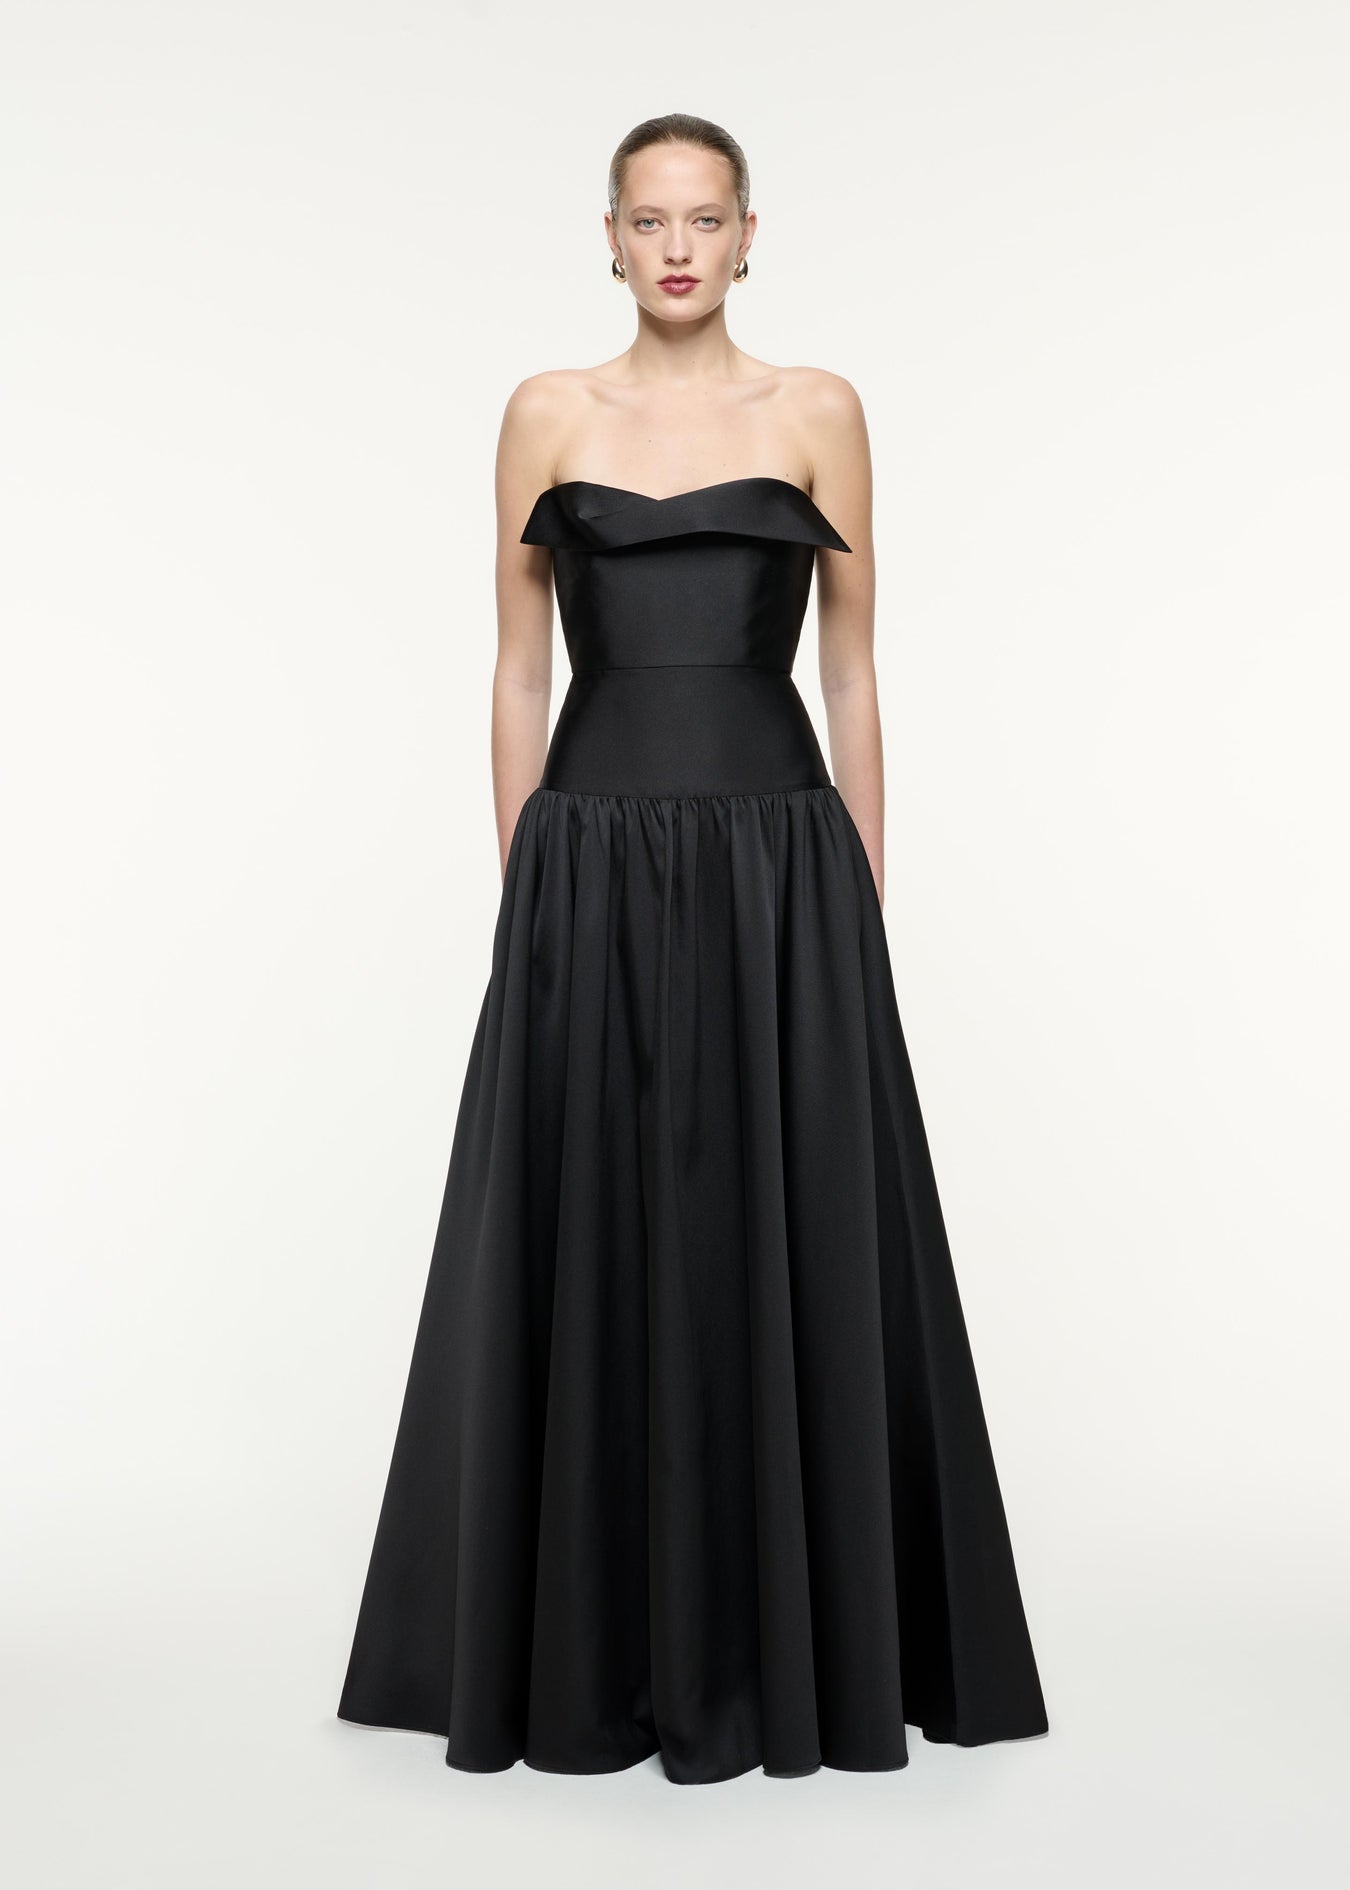 A front view image of a model wearing the Strapless Taffeta Gown in Black